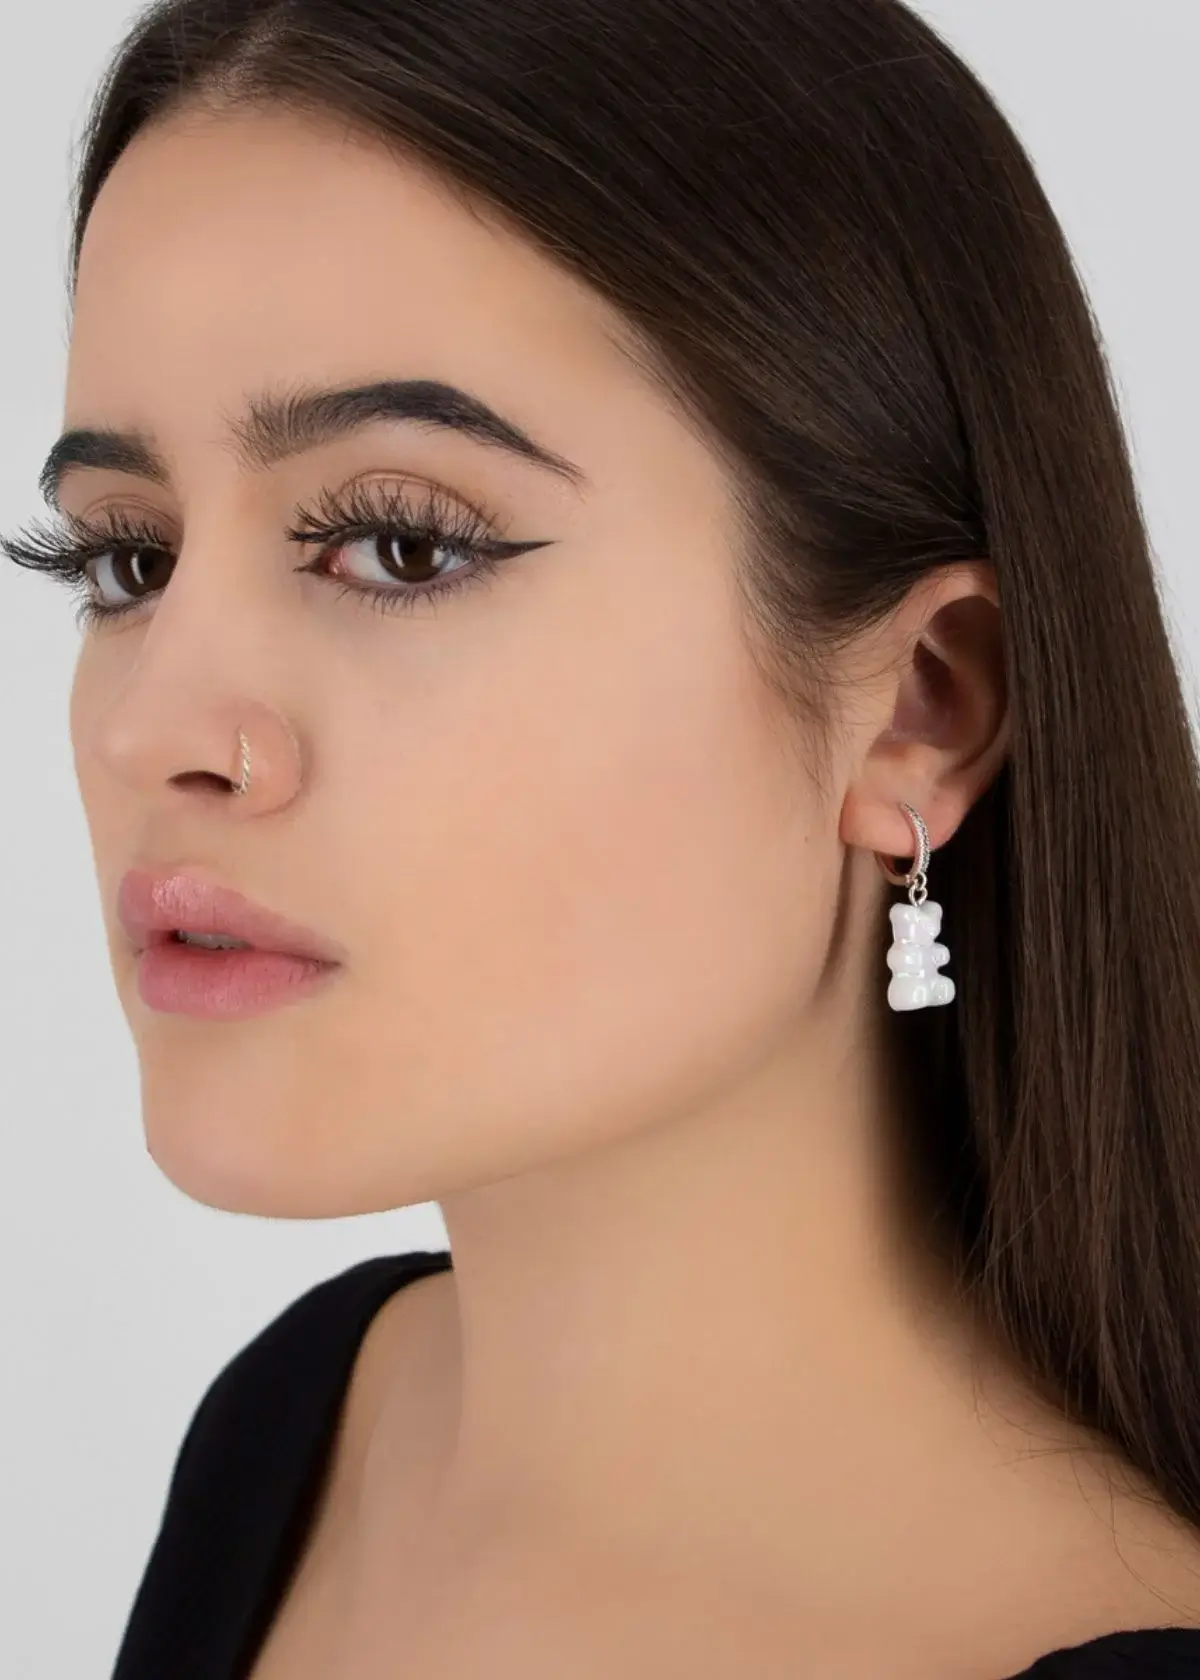 Are there symbolic meanings associated with bear earrings?